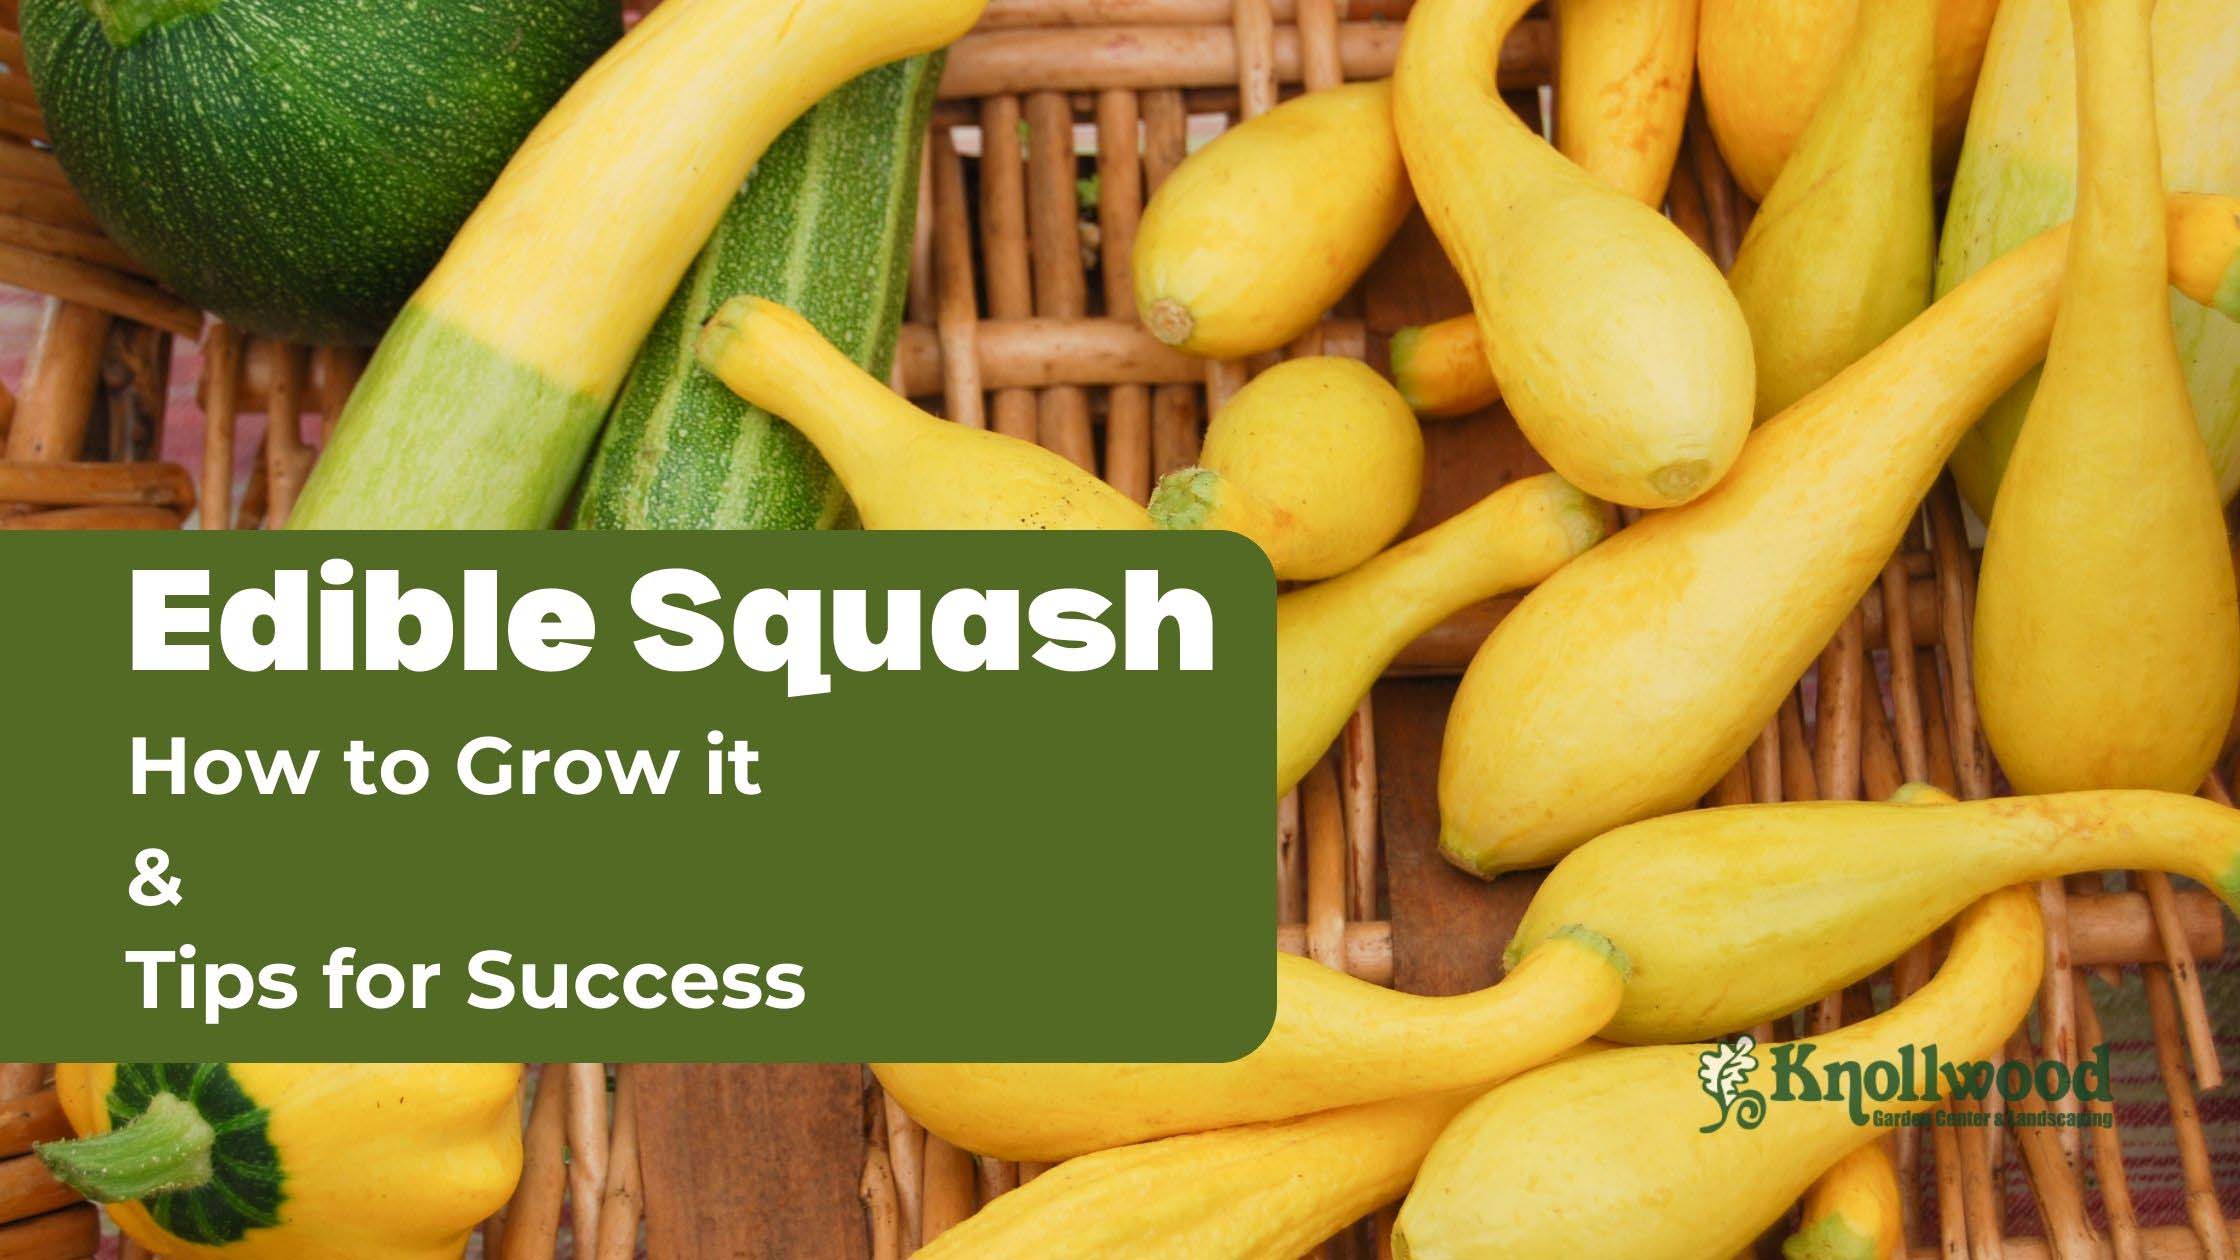 Several types of squash. The text reads, "Edible Squash: How to Grow It & Tips for Success" 